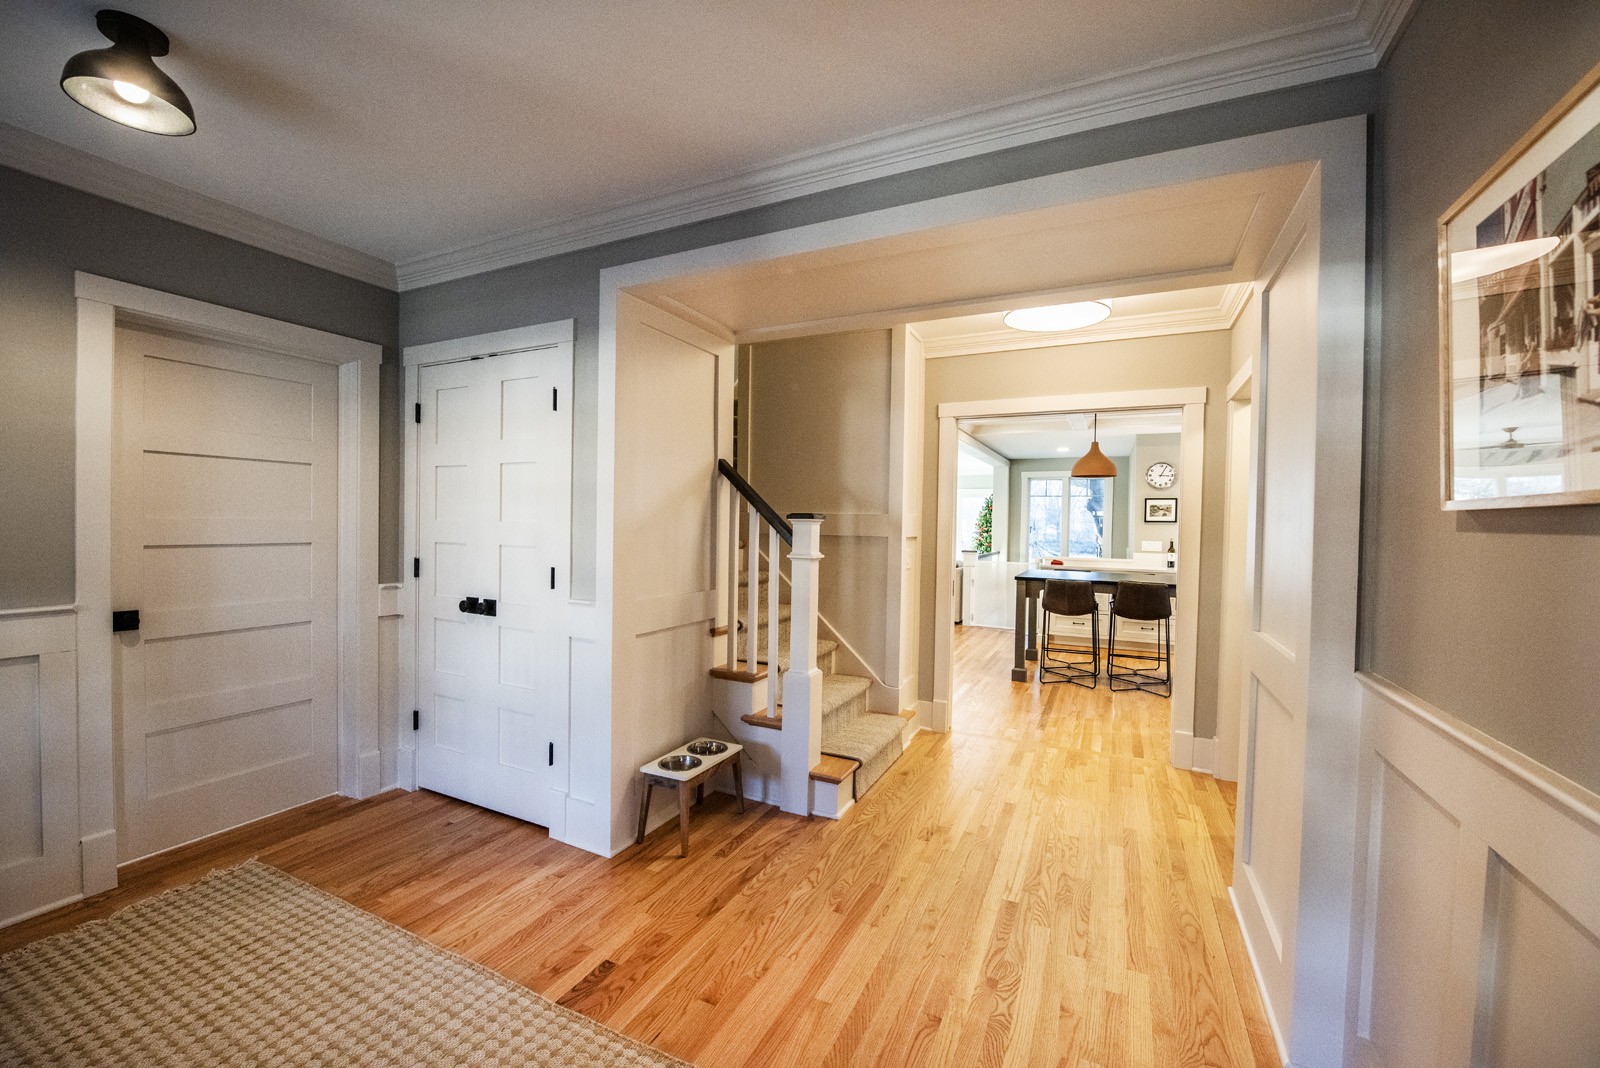 Long view of updated entryway leading into kitchen with grey walls, white crown moulding, & custom white-paneled doors